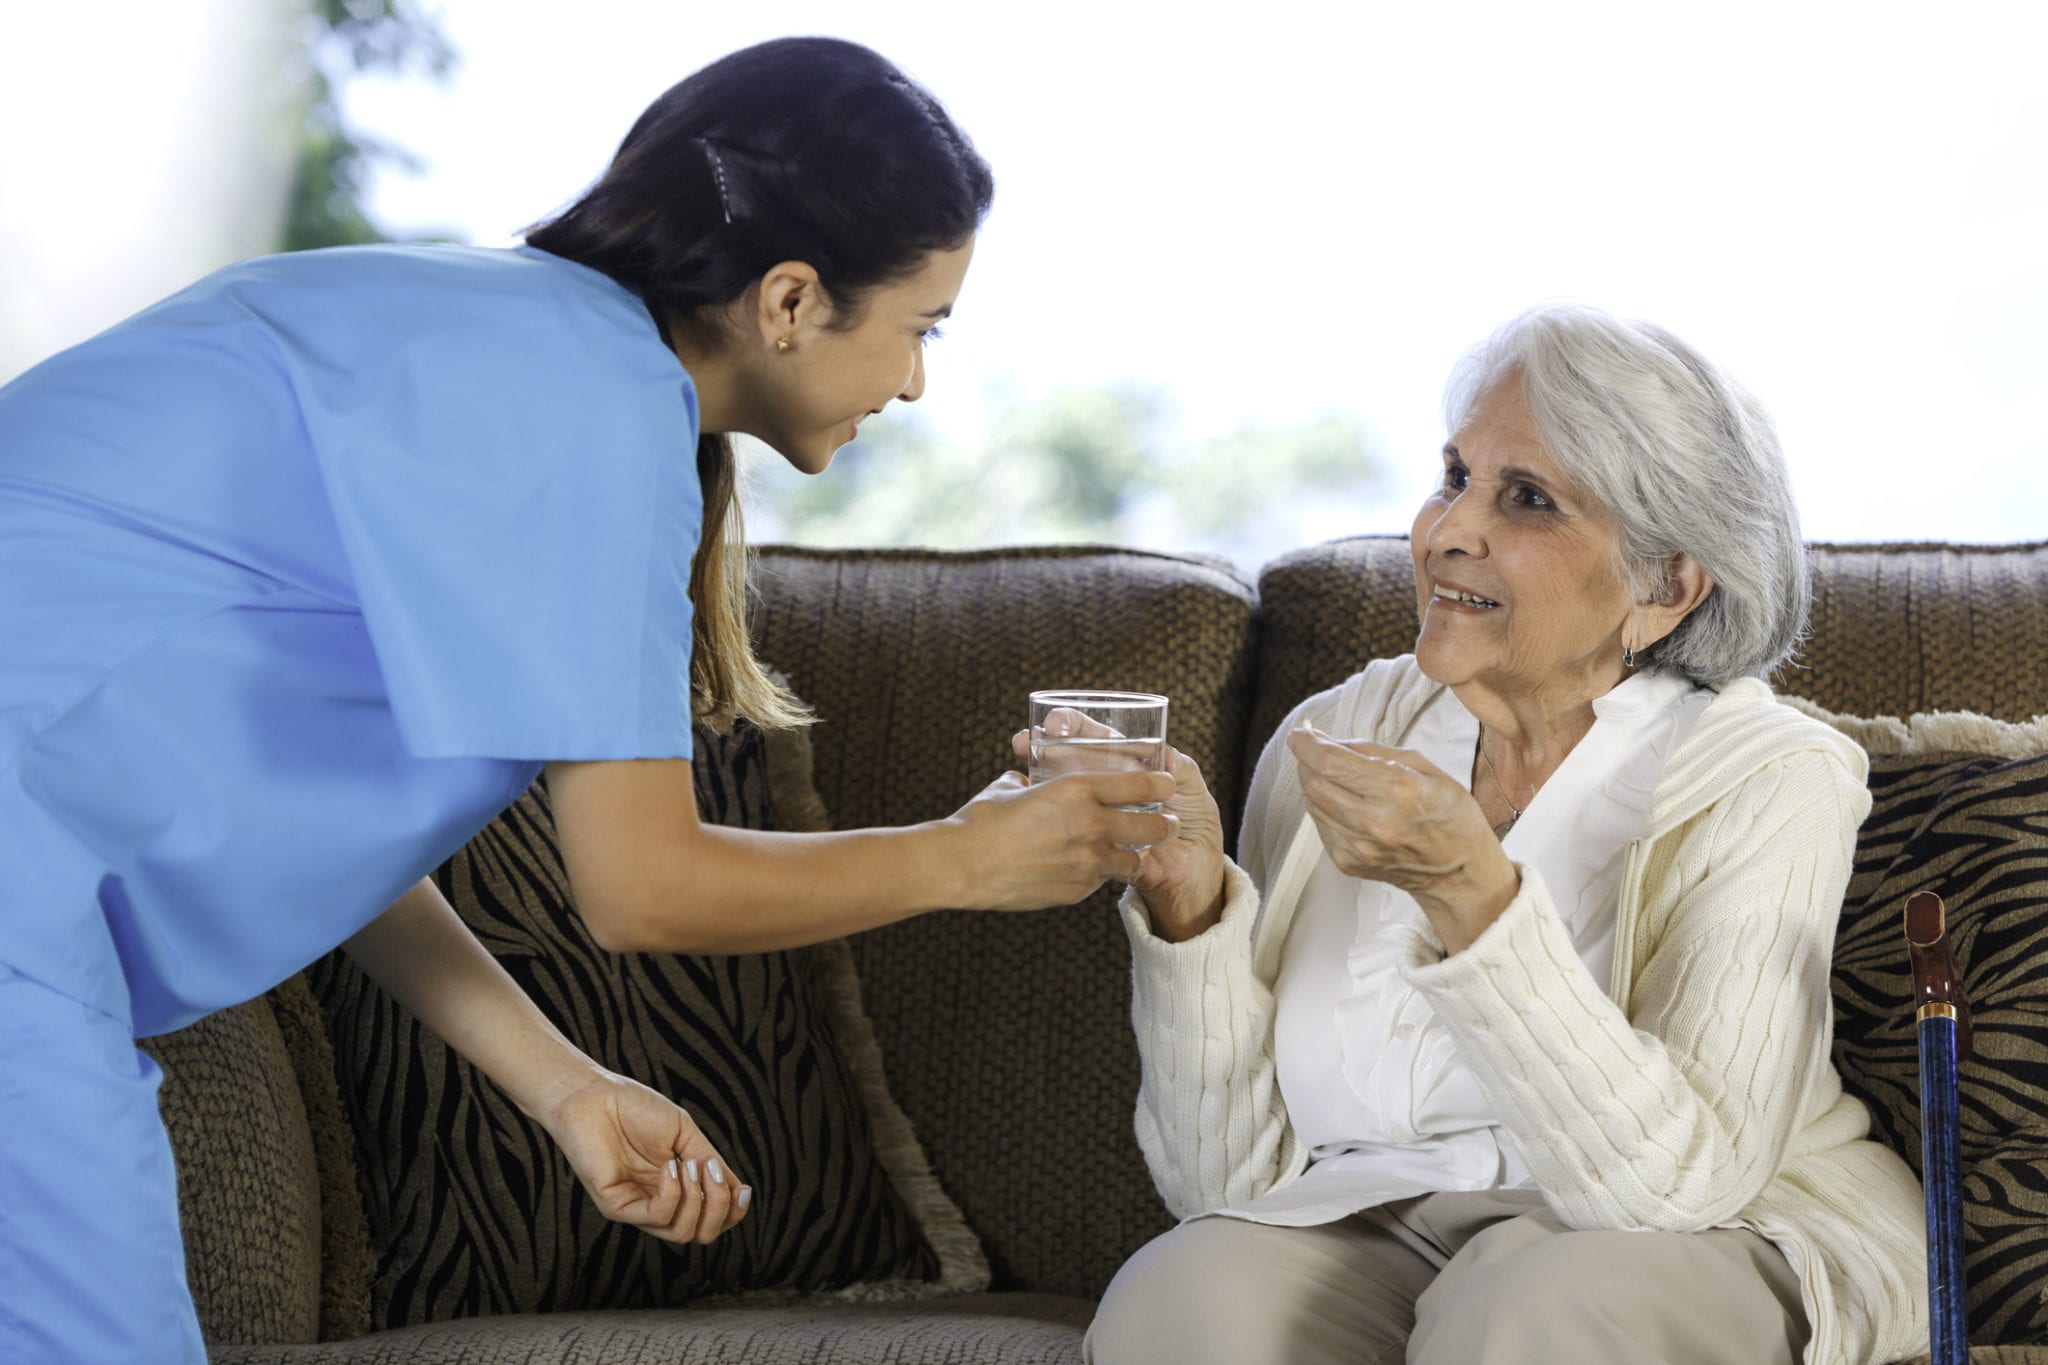 Female hospice nurse giving medication to a female patient